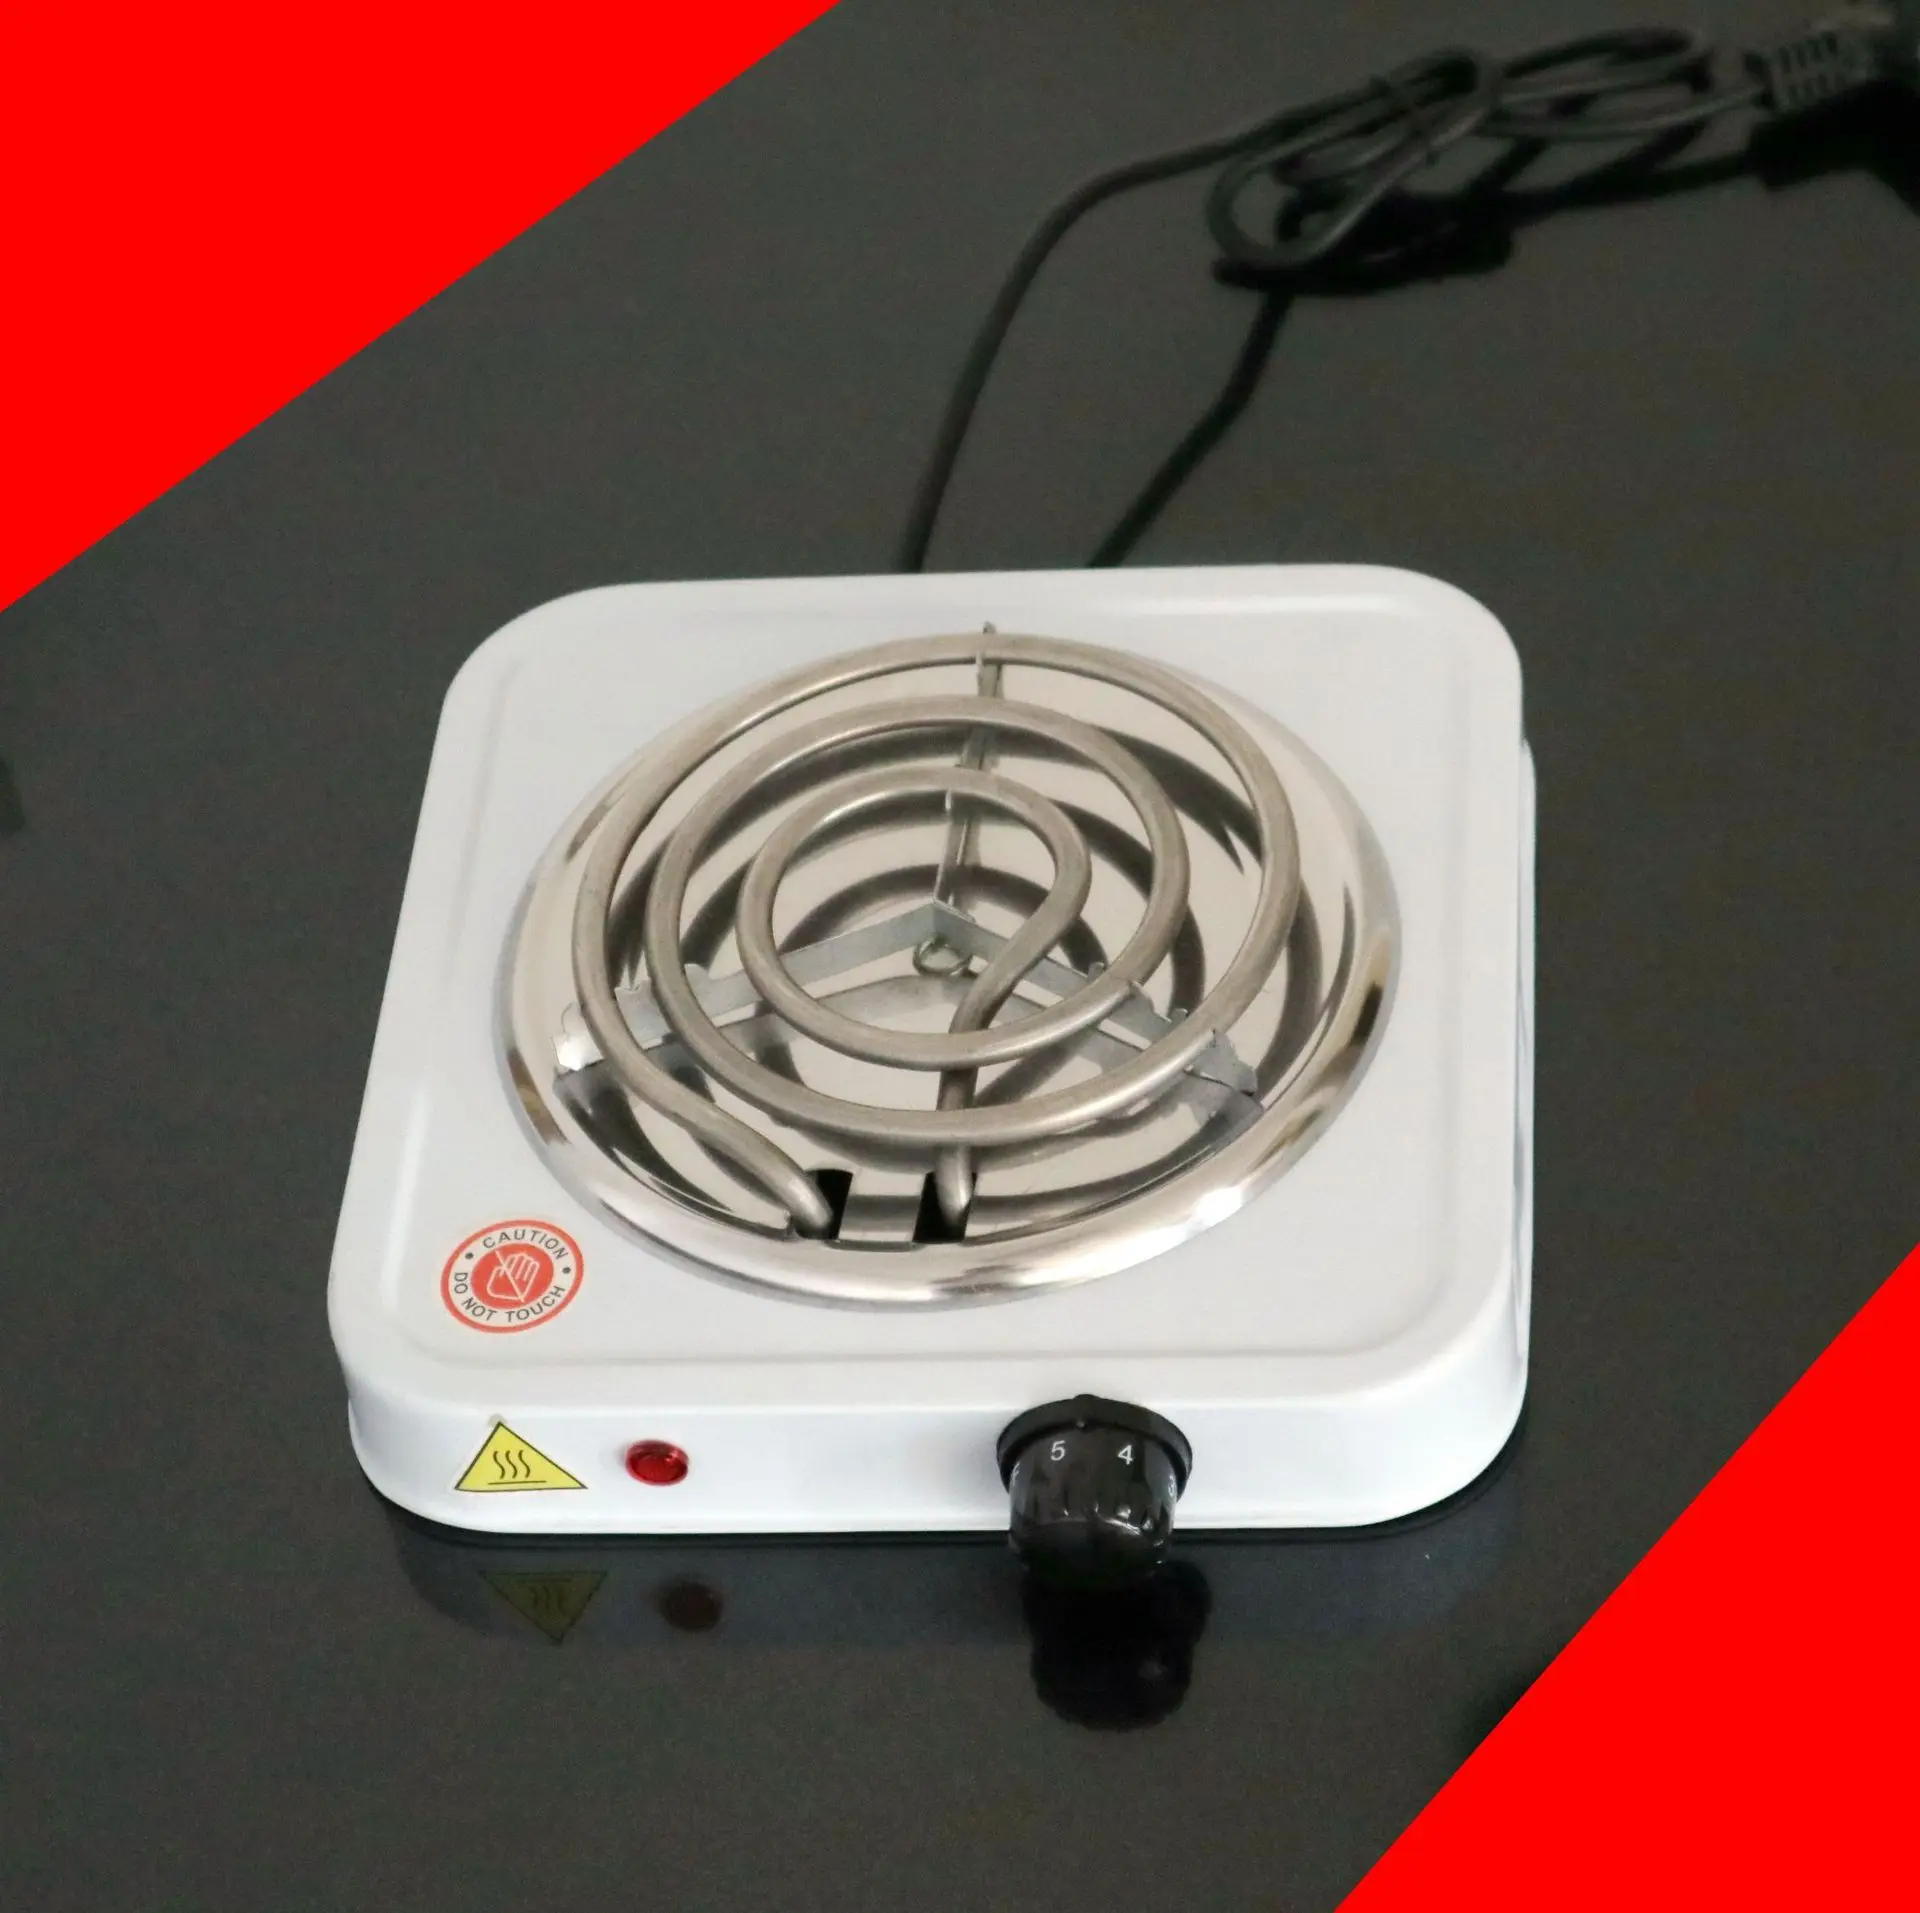 220V 500W Electric Stove Hot Plate Iron Burner Home Kitchen Cooker Coffee  Heater Household Cooking Appliances